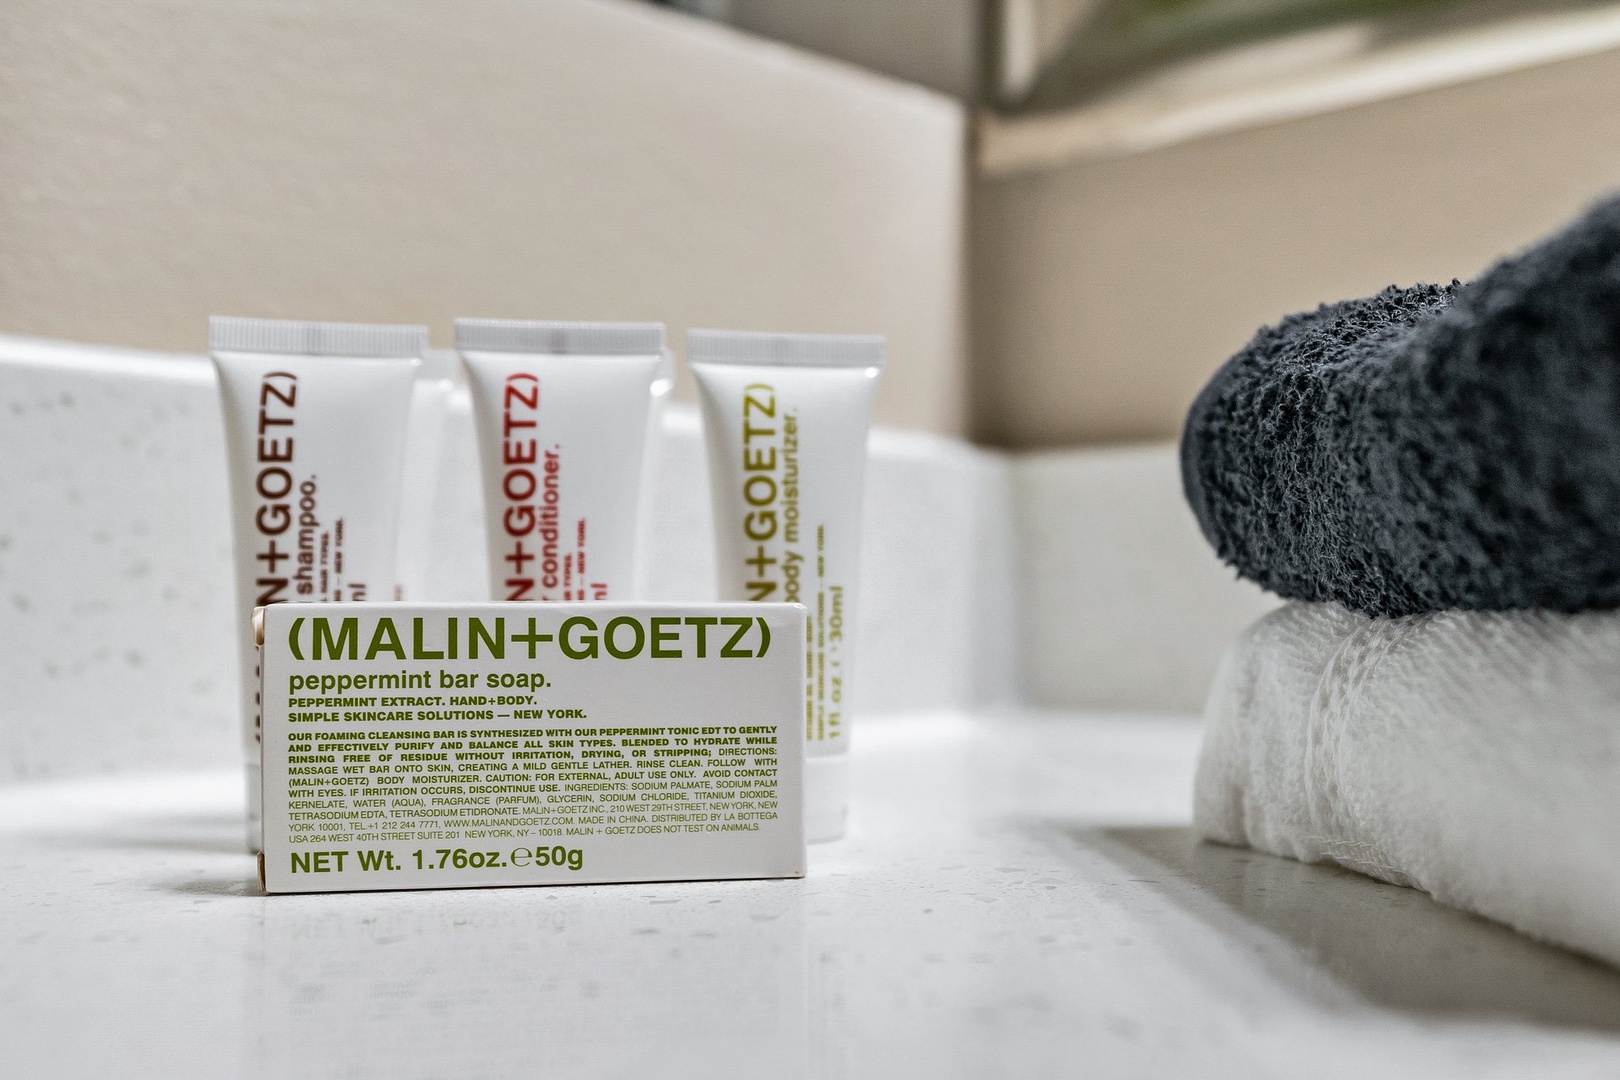 Pamper yourself with complimentary toiletries by Malin + Goetz in the bathroom.